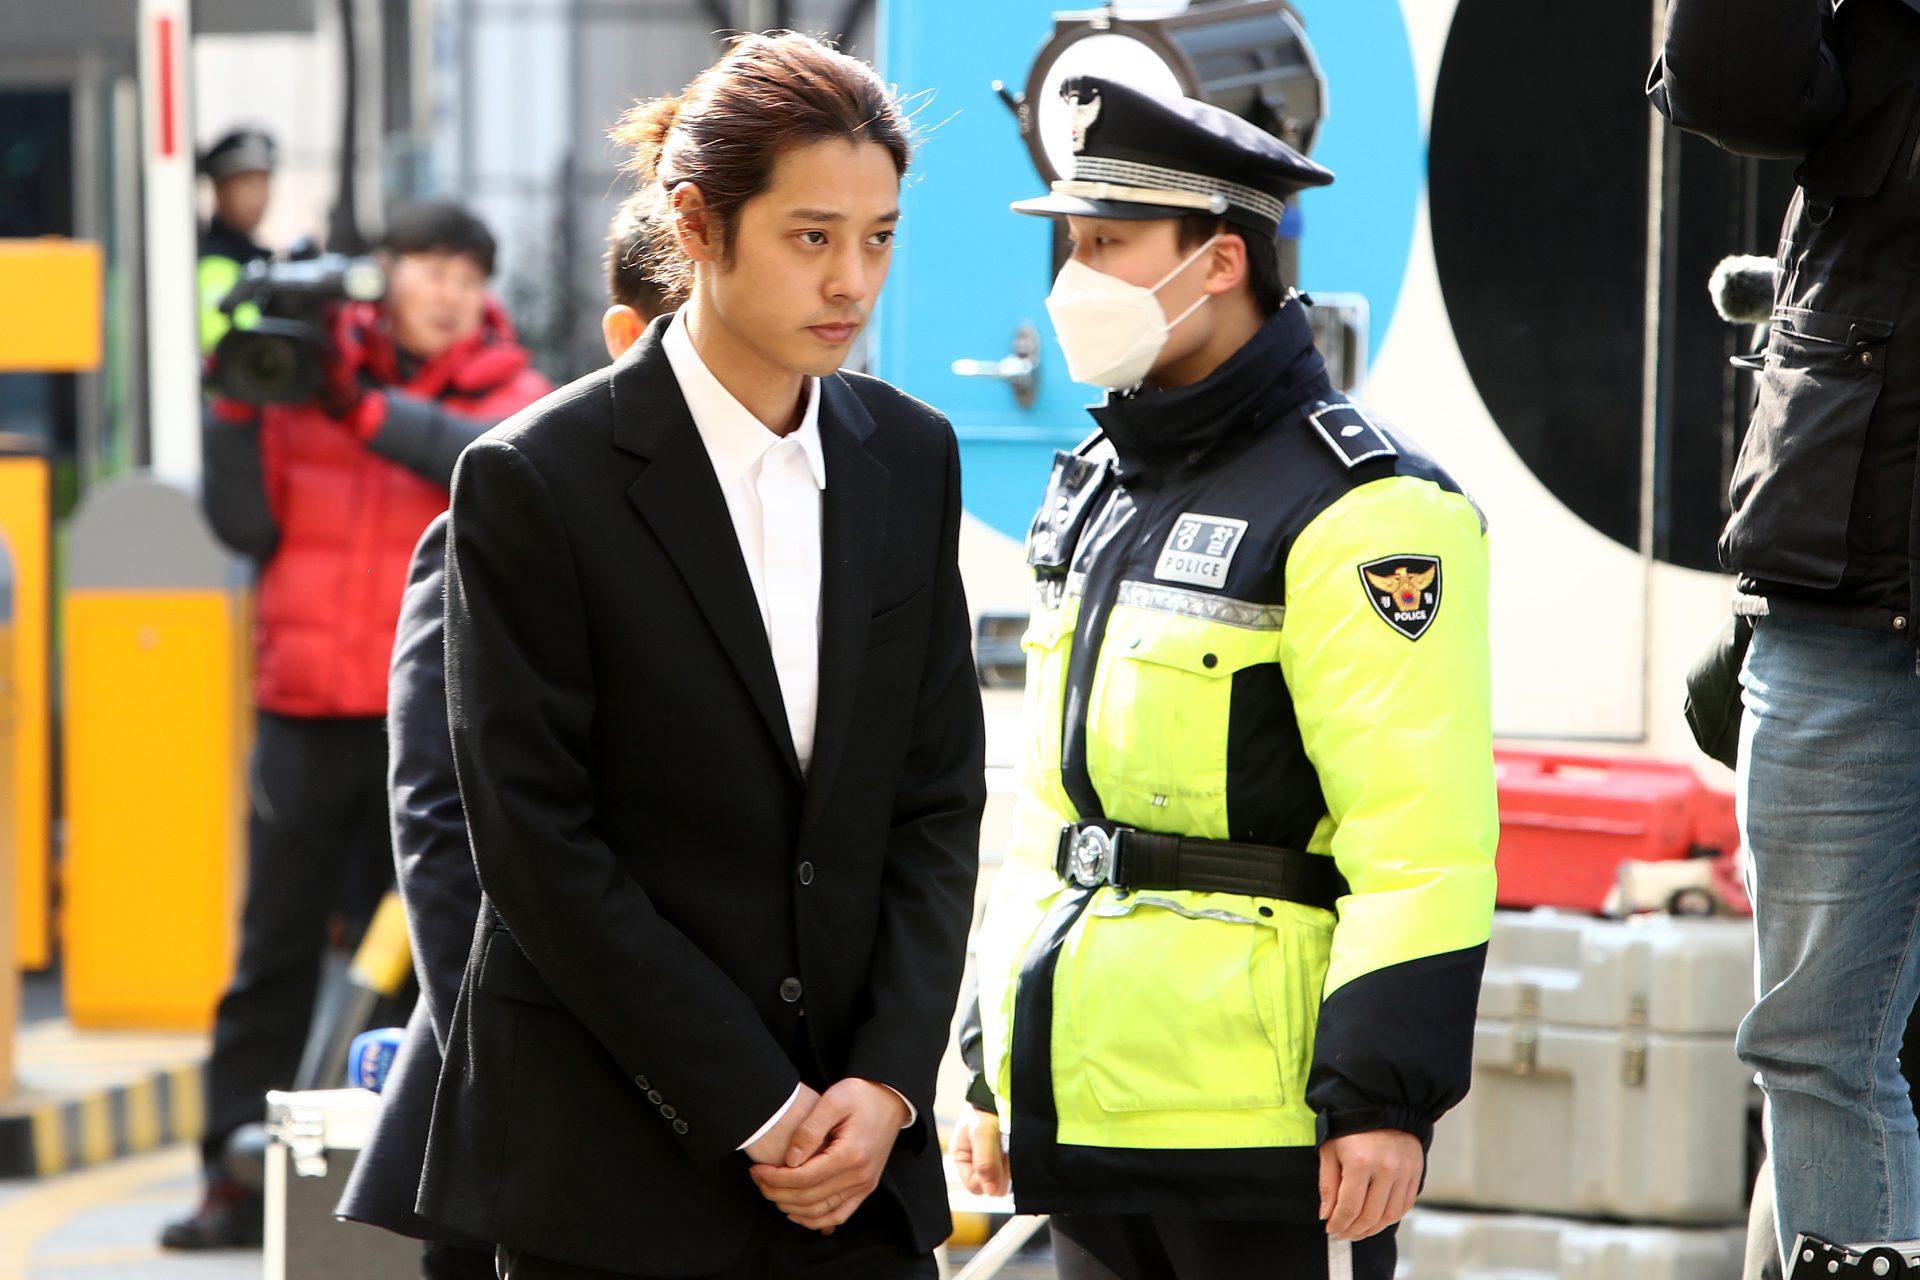 Controversy after Jung Joon-young's prison release in 'Burning Sun' case